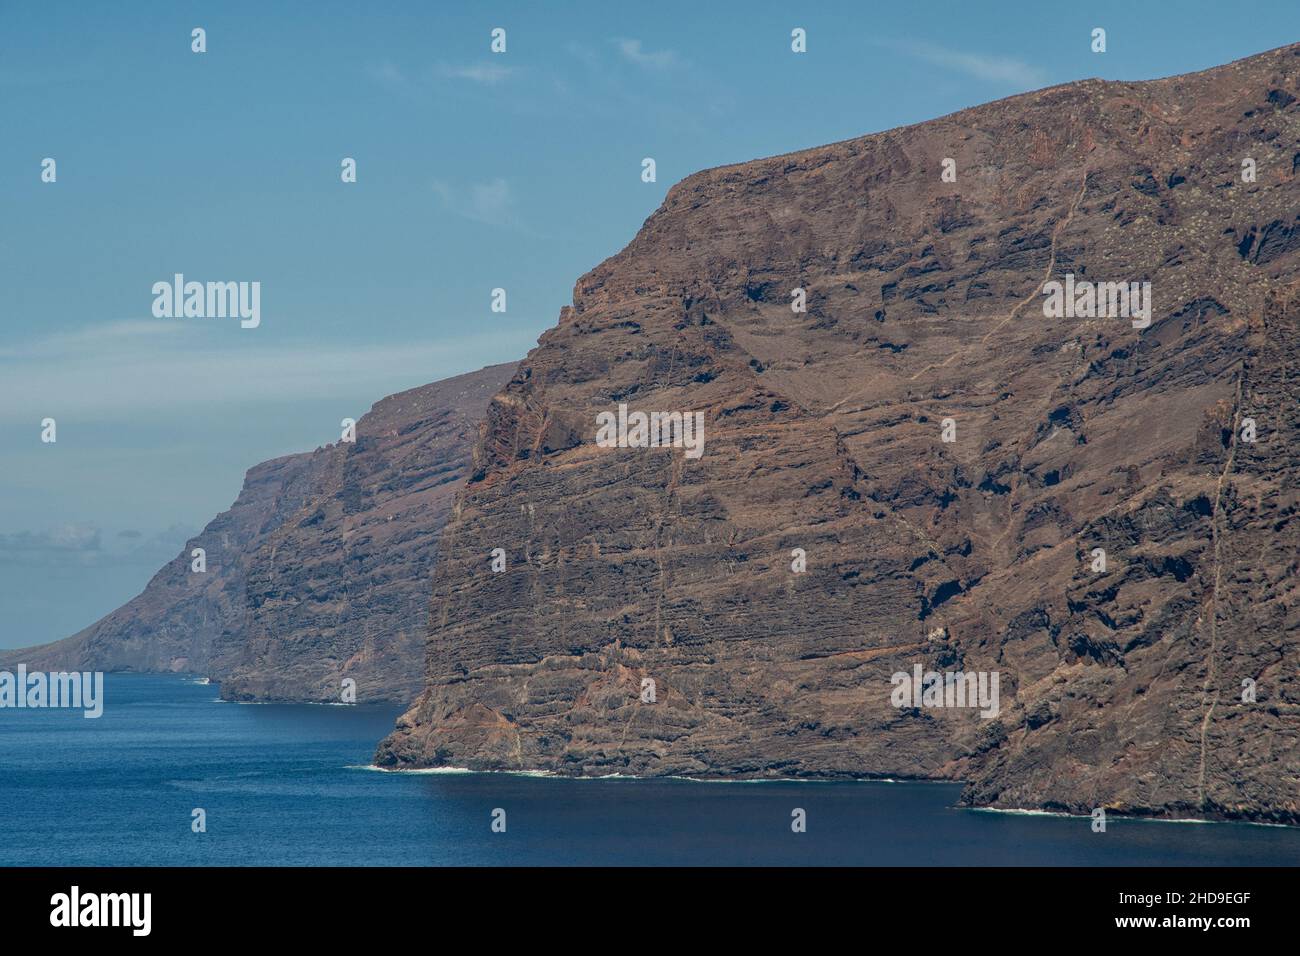 The Los Gigantes cliffs on the Canary Island of Tenerife Stock Photo